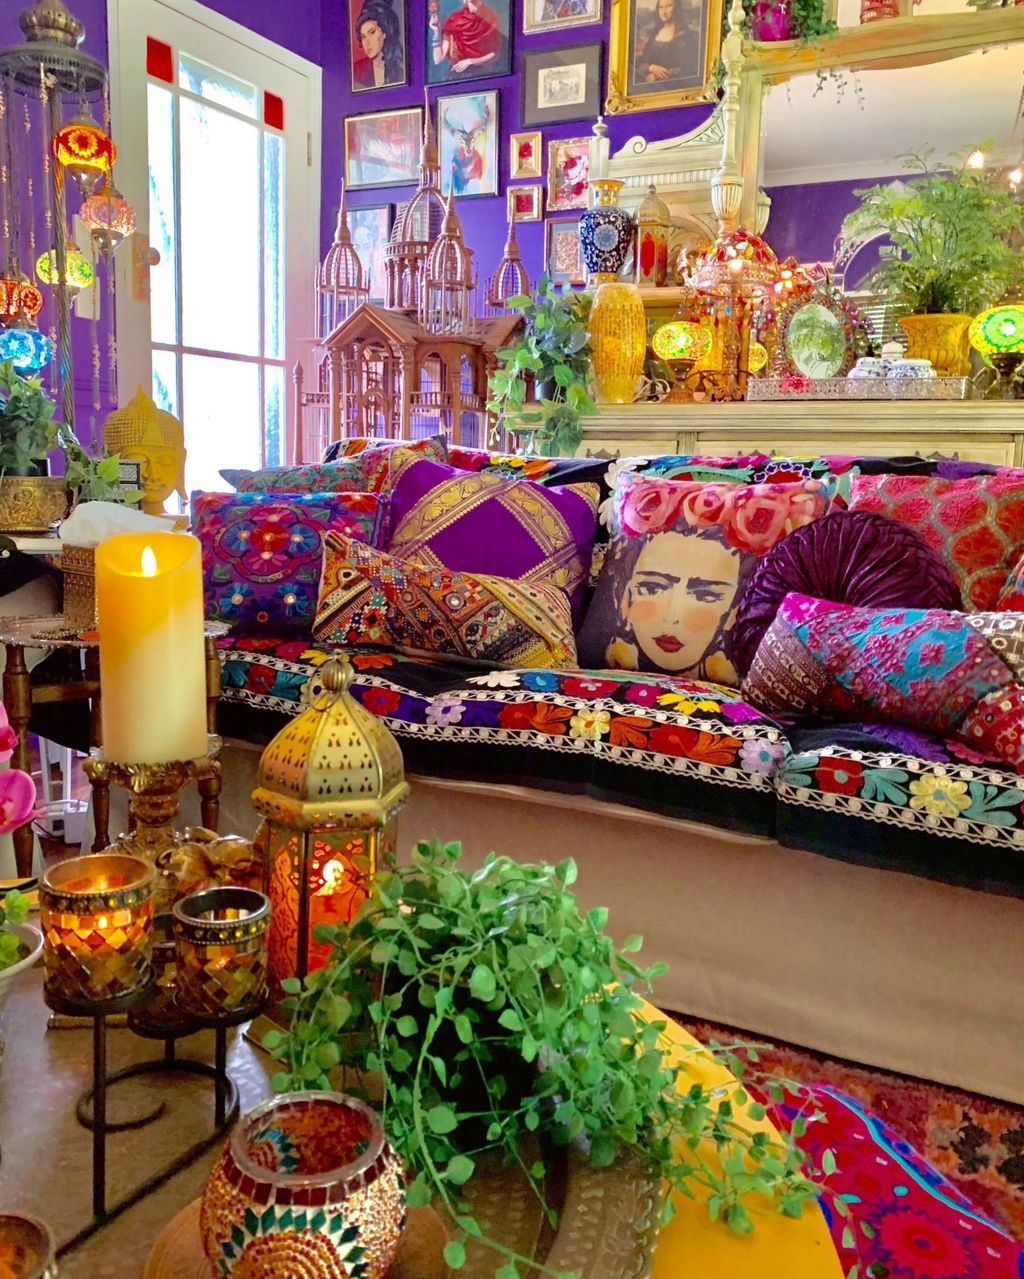 35 Charming Boho Living Room Decorating Ideas With Gypsy Style - HOMISHOME